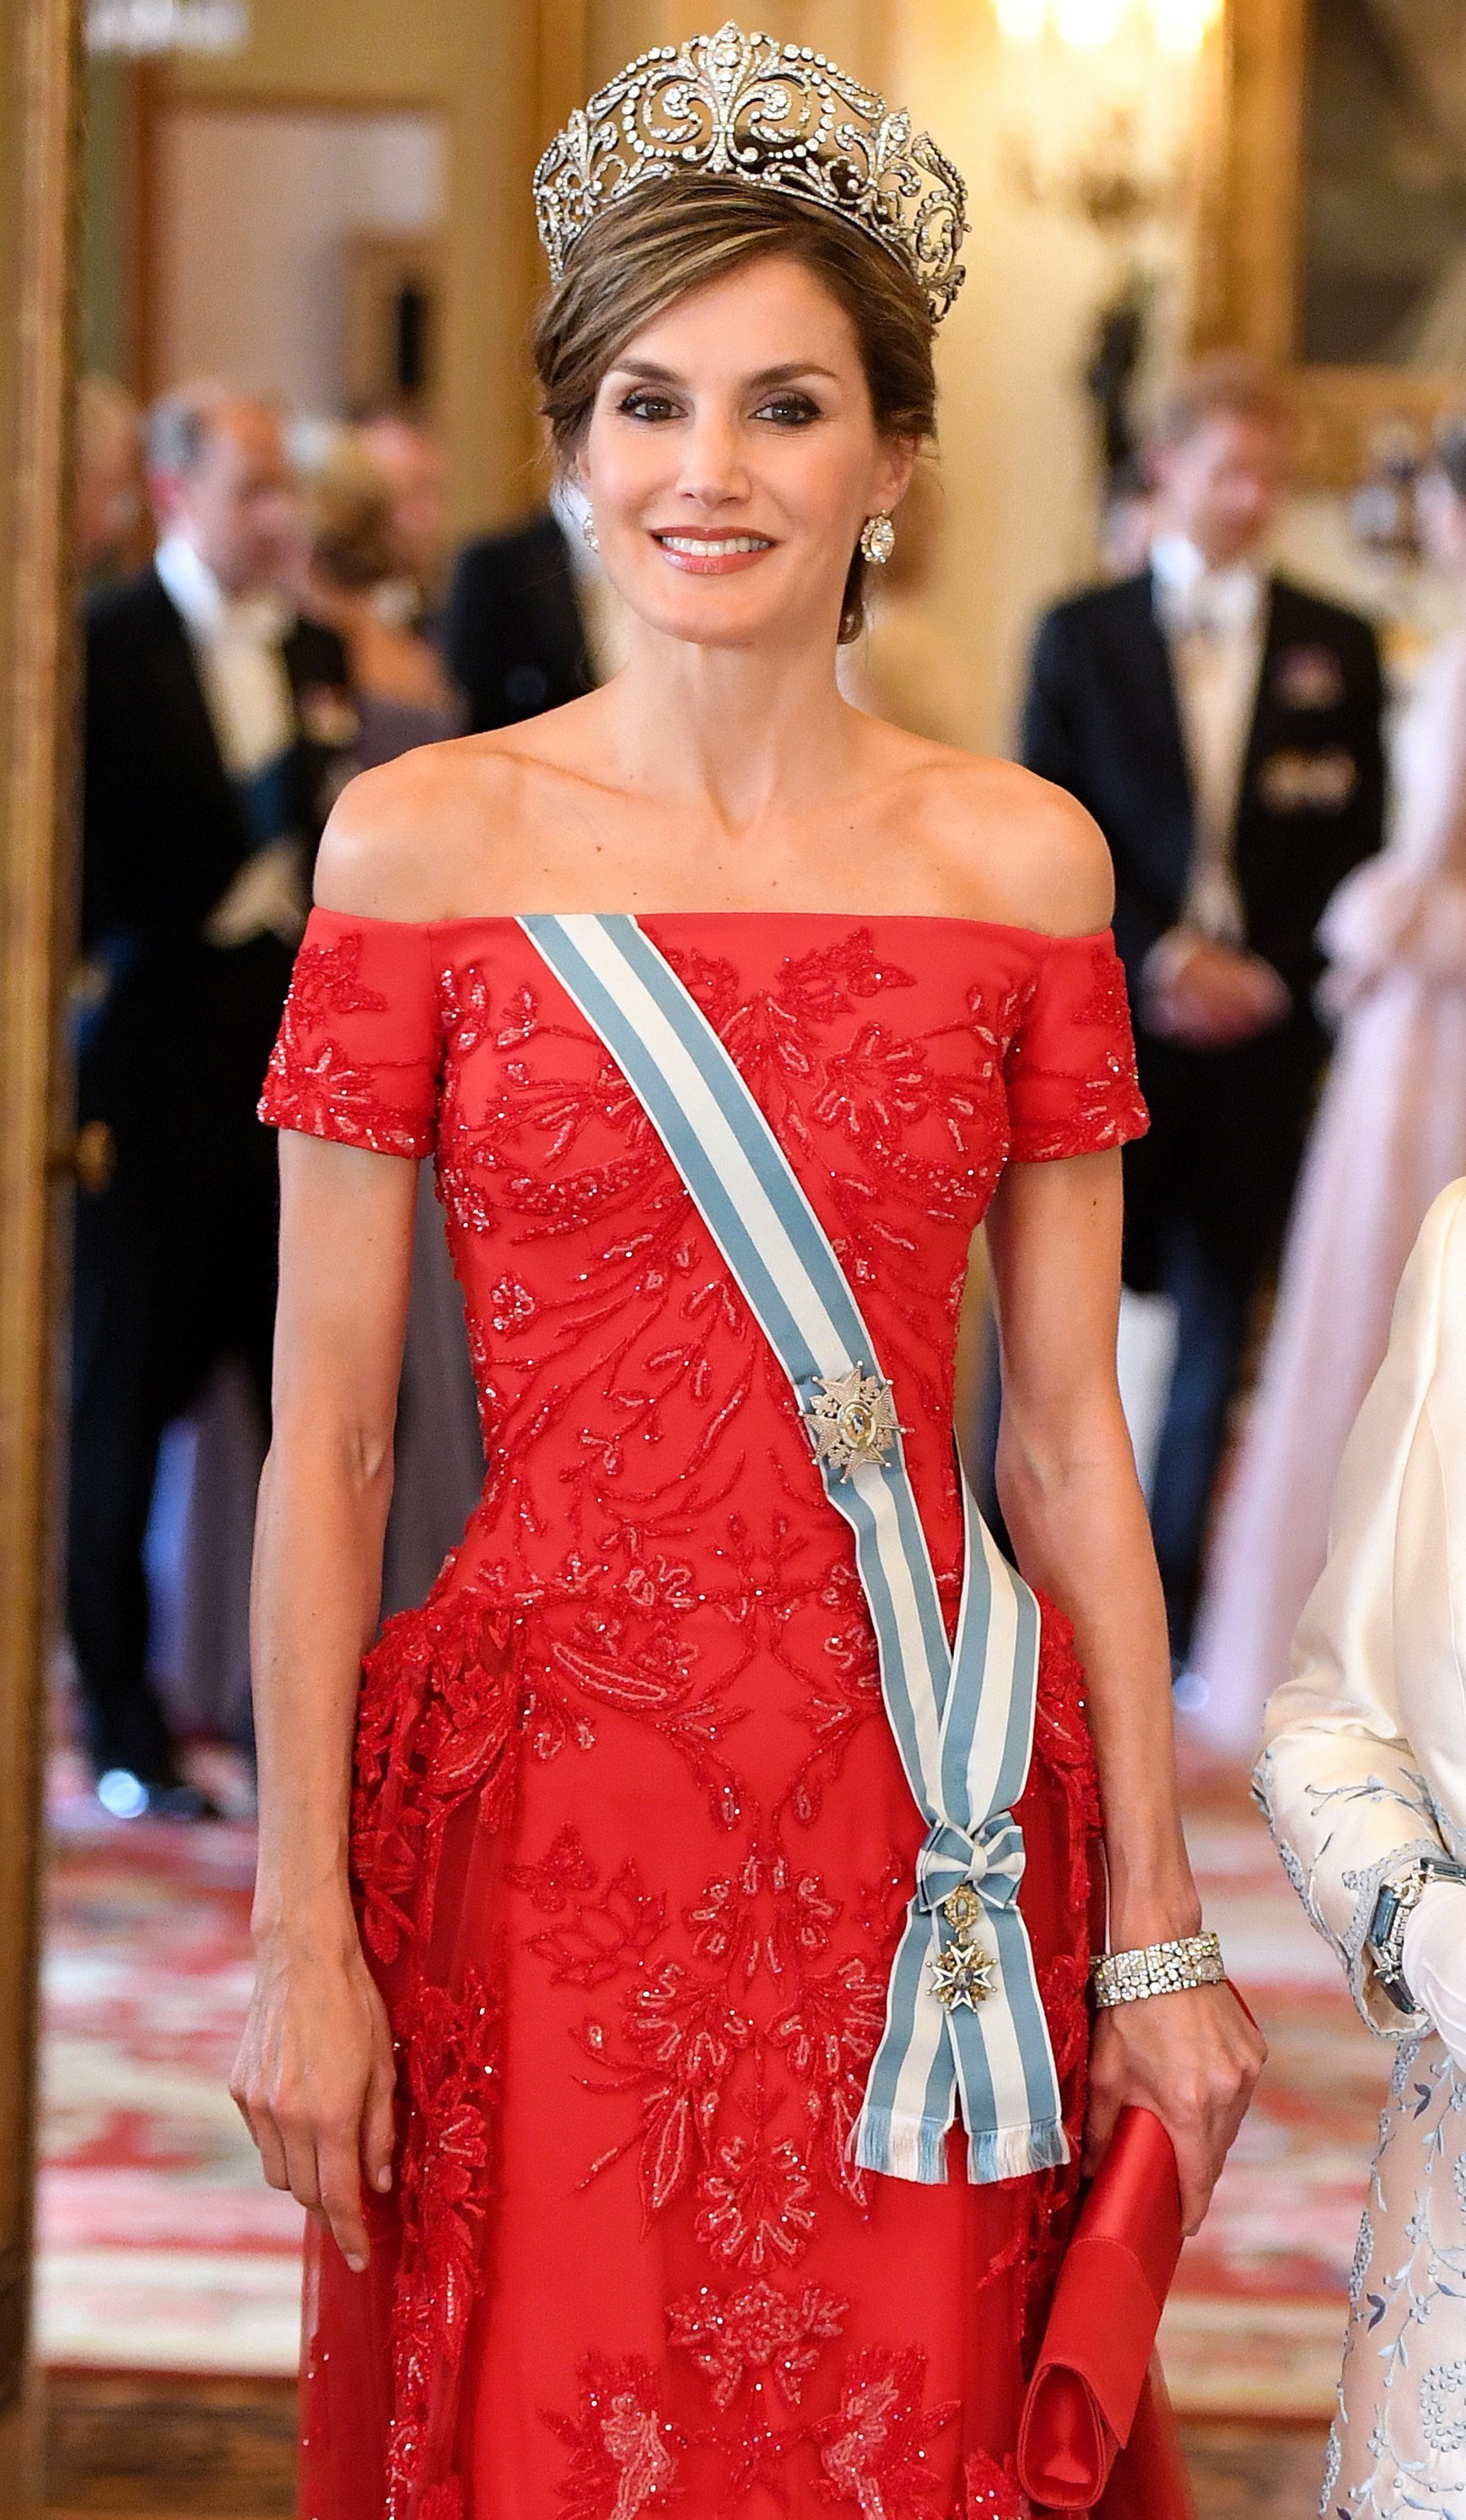 Queen Letizia and the Duchess of Cambridge in a style duel